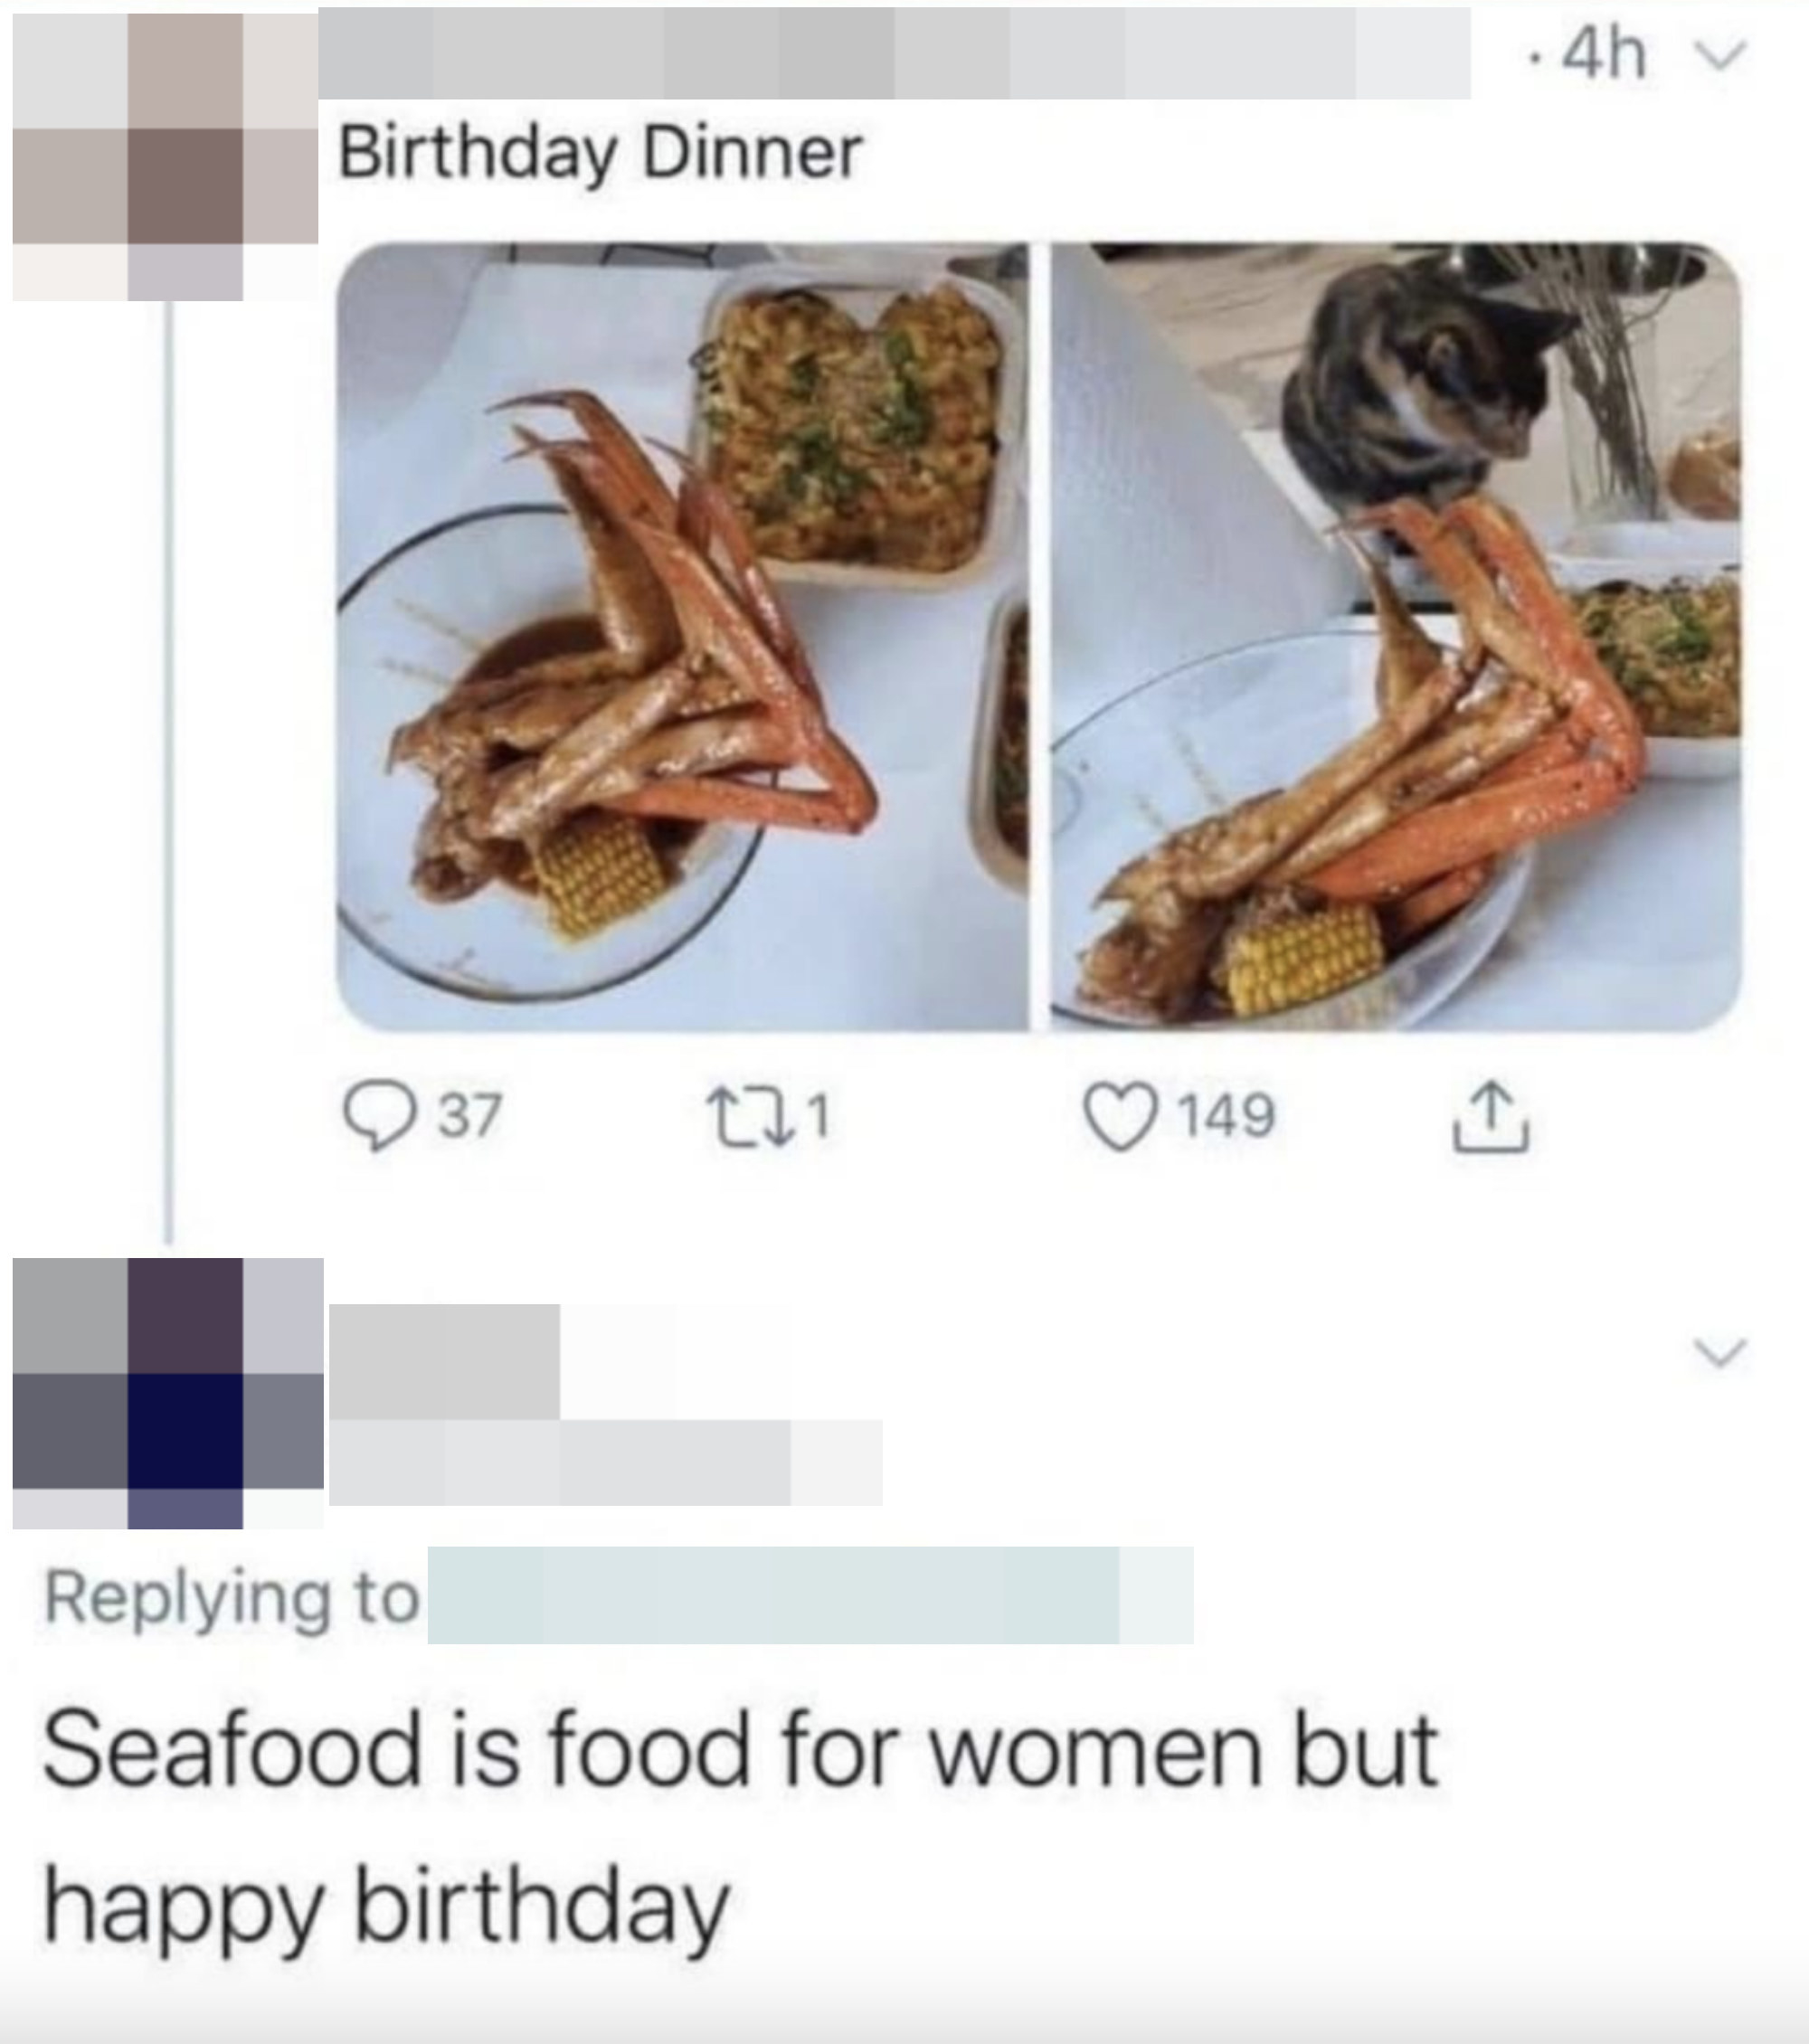 &quot;Seafood is food for women but happy birthday&quot;